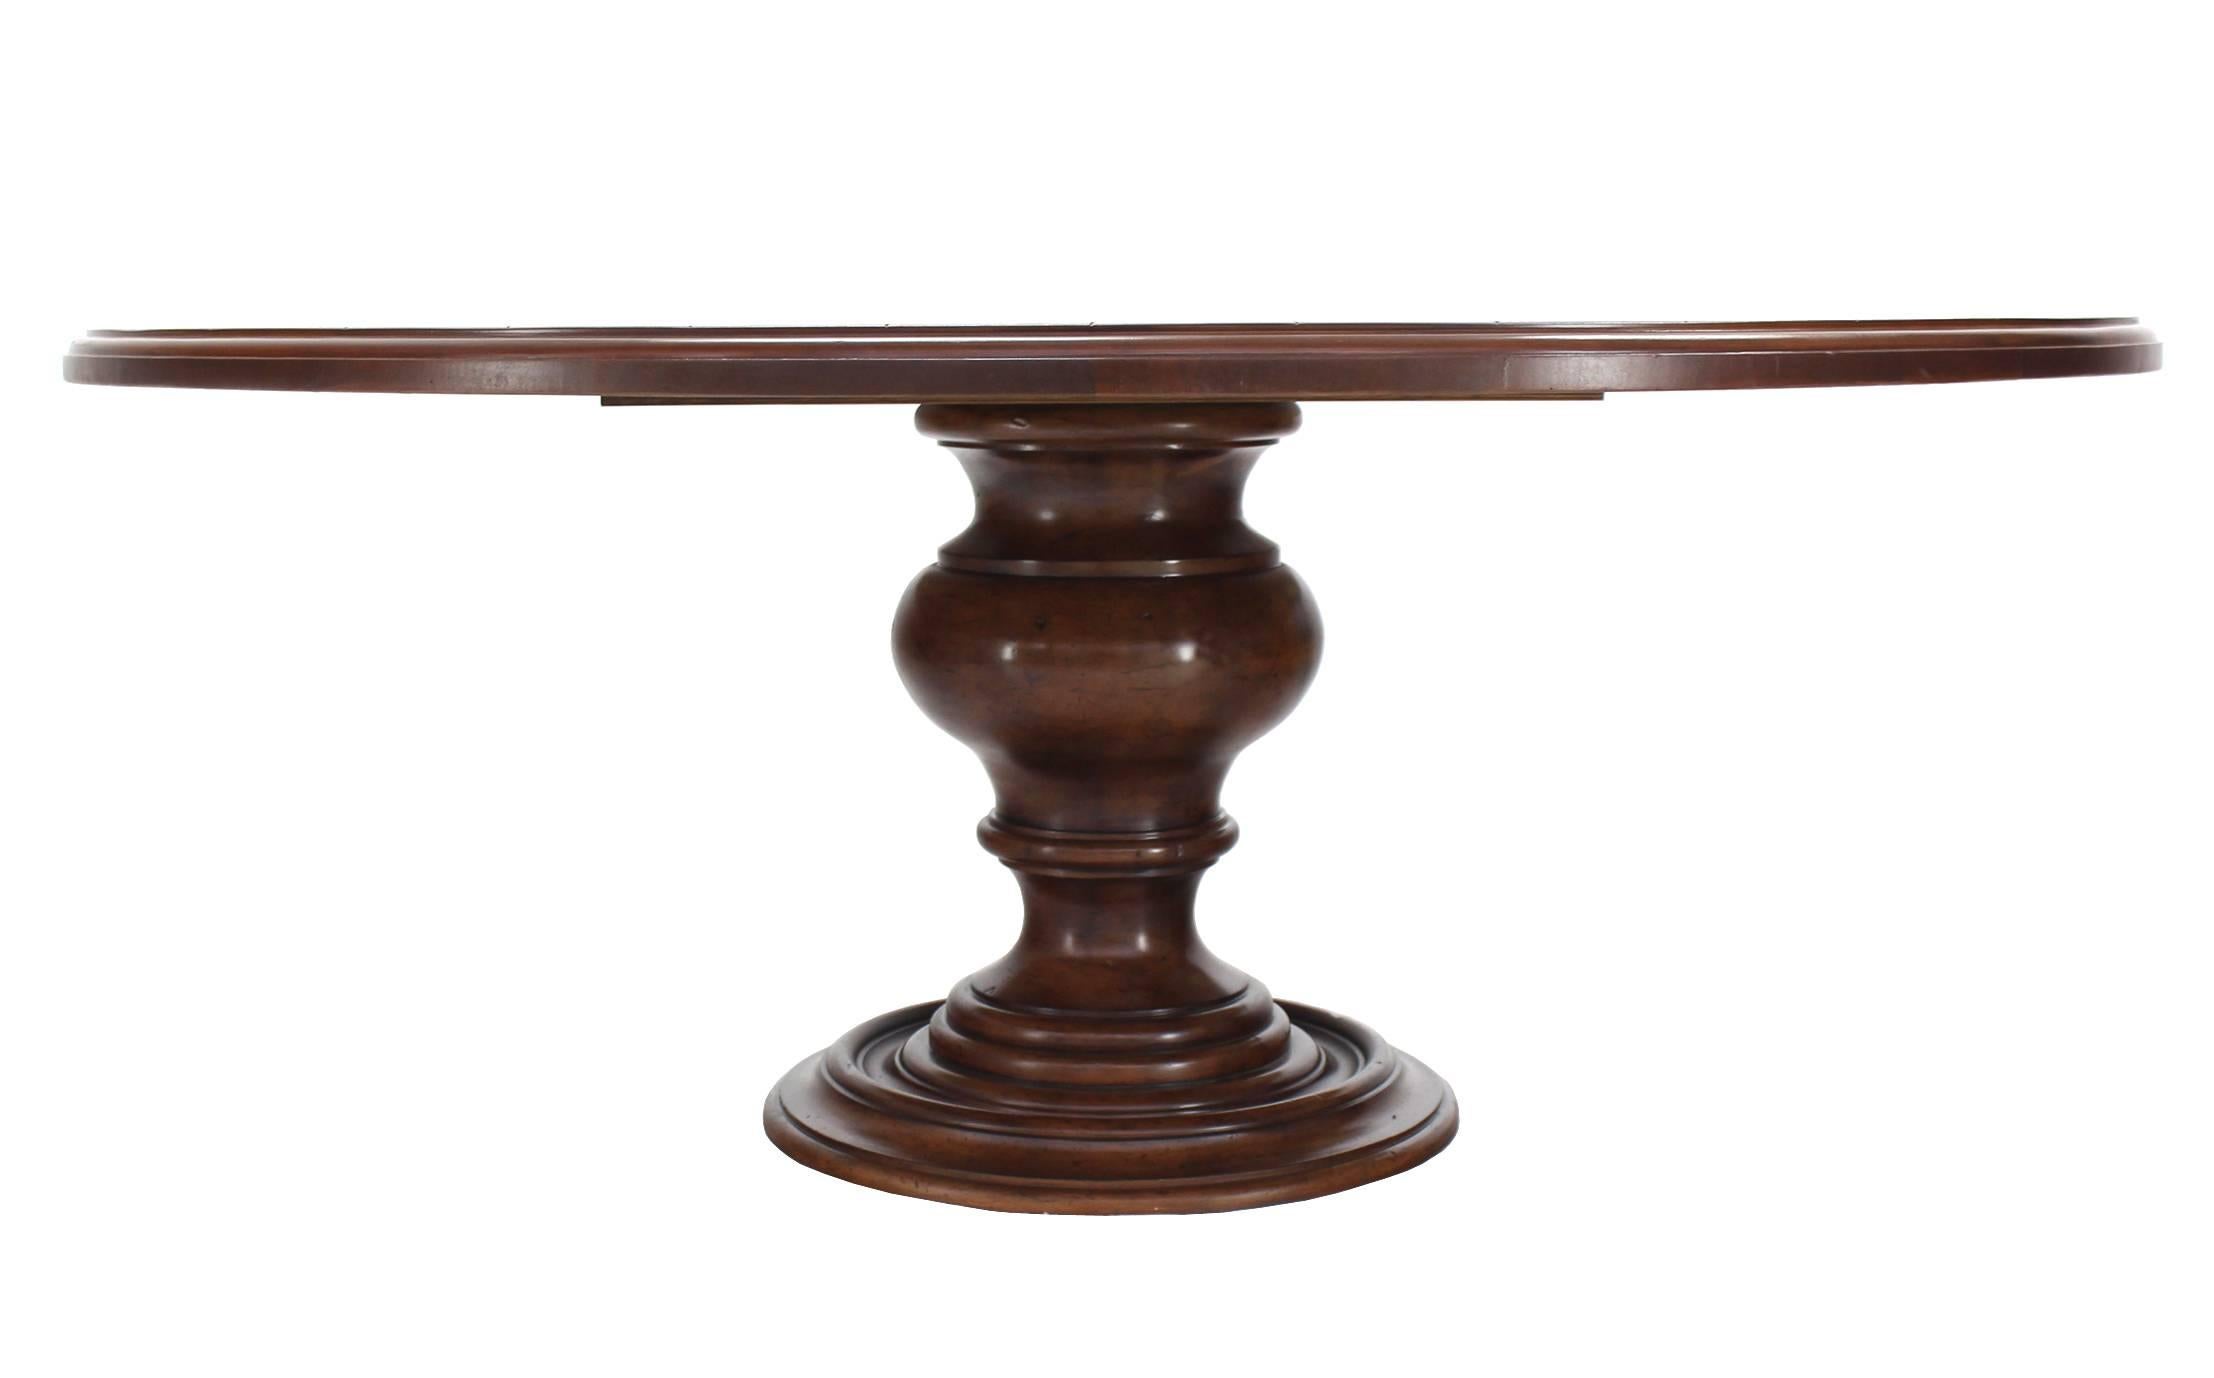 Very nice massive turned base 6' diameter round dining table.